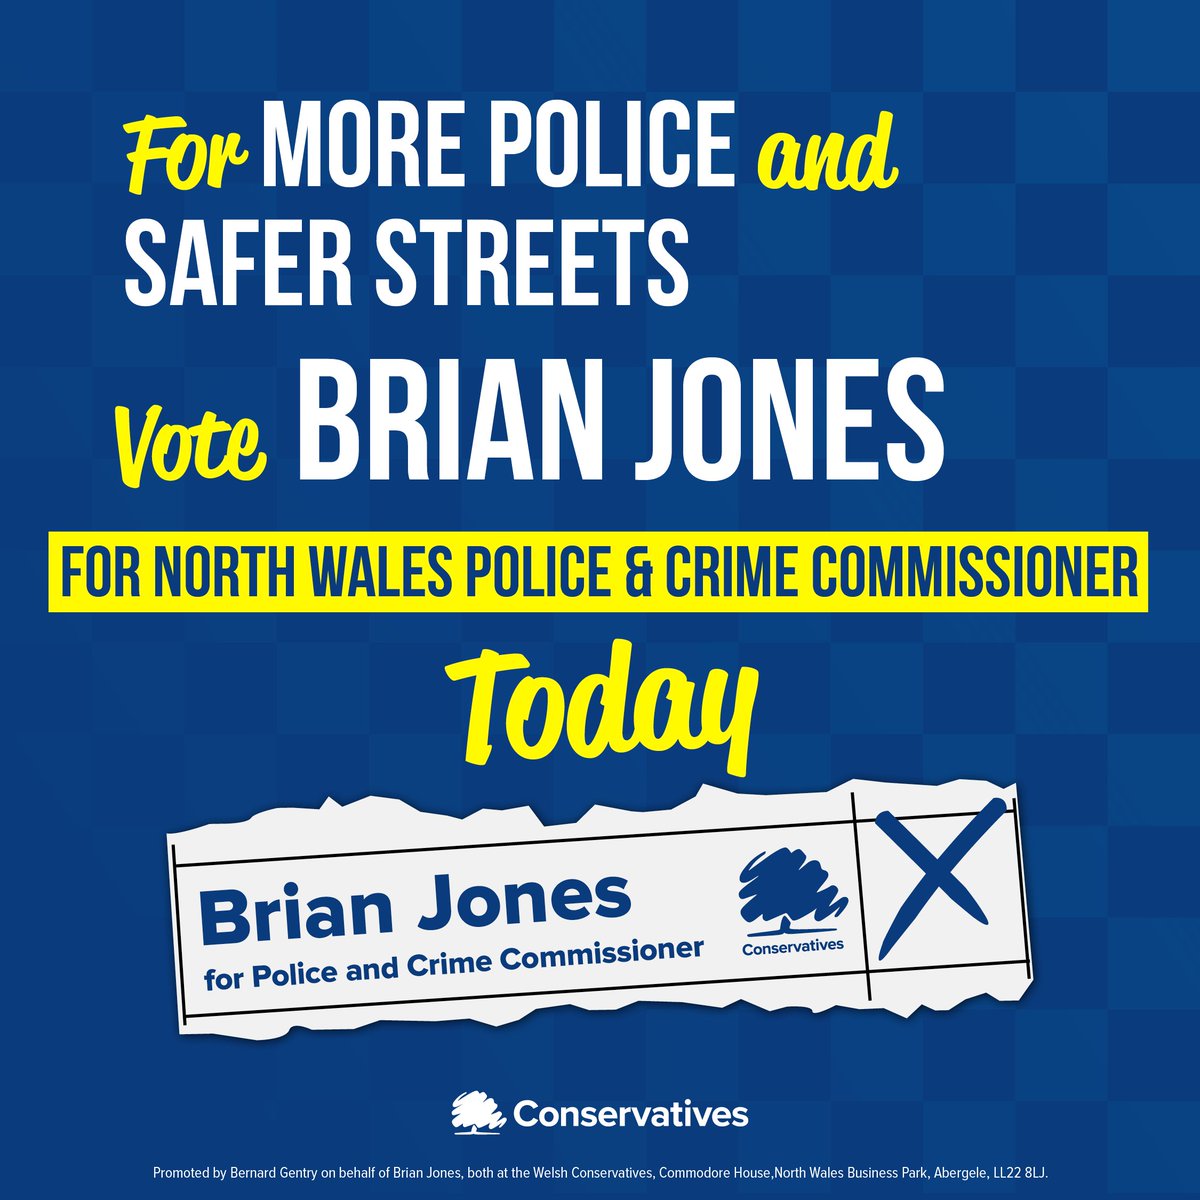 🗳 Today - Thursday 2nd May - is polling day in North Wales for our Police and Crime Commissioner. Please vote for Brian Jones, Conservative candidate. Polls are open until 10pm. Photo ID required. More information here: jamesdavies.org.uk/sites/www.jame…